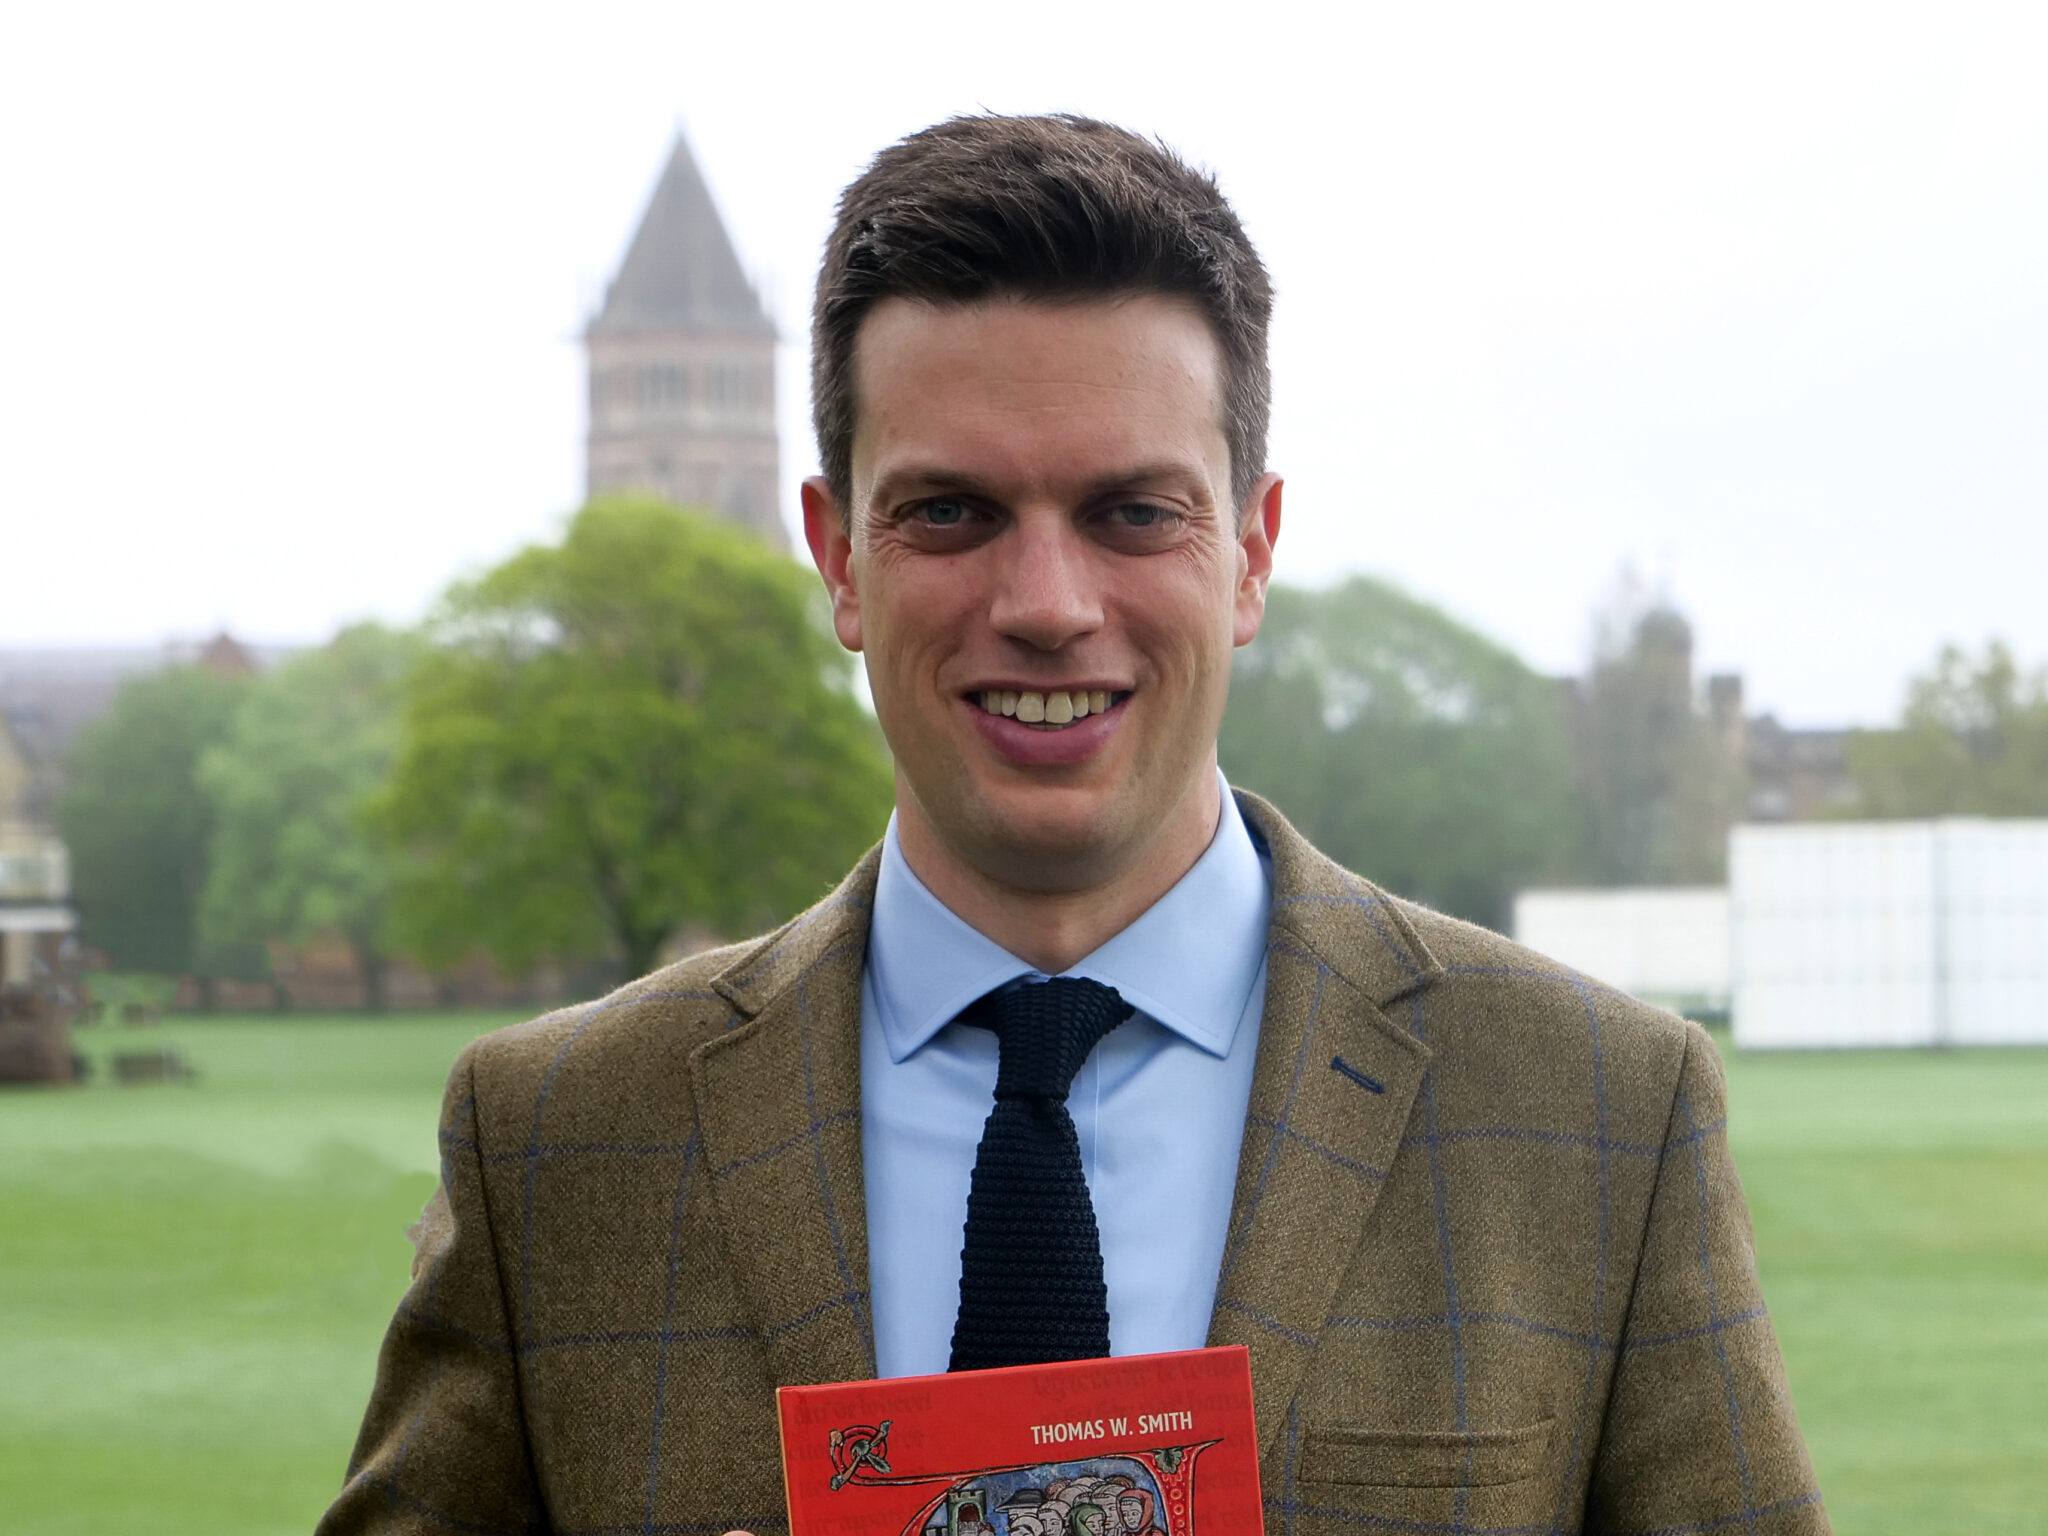 History teacher, Dr Thomas Smith, publishes book on letters from the first crusade